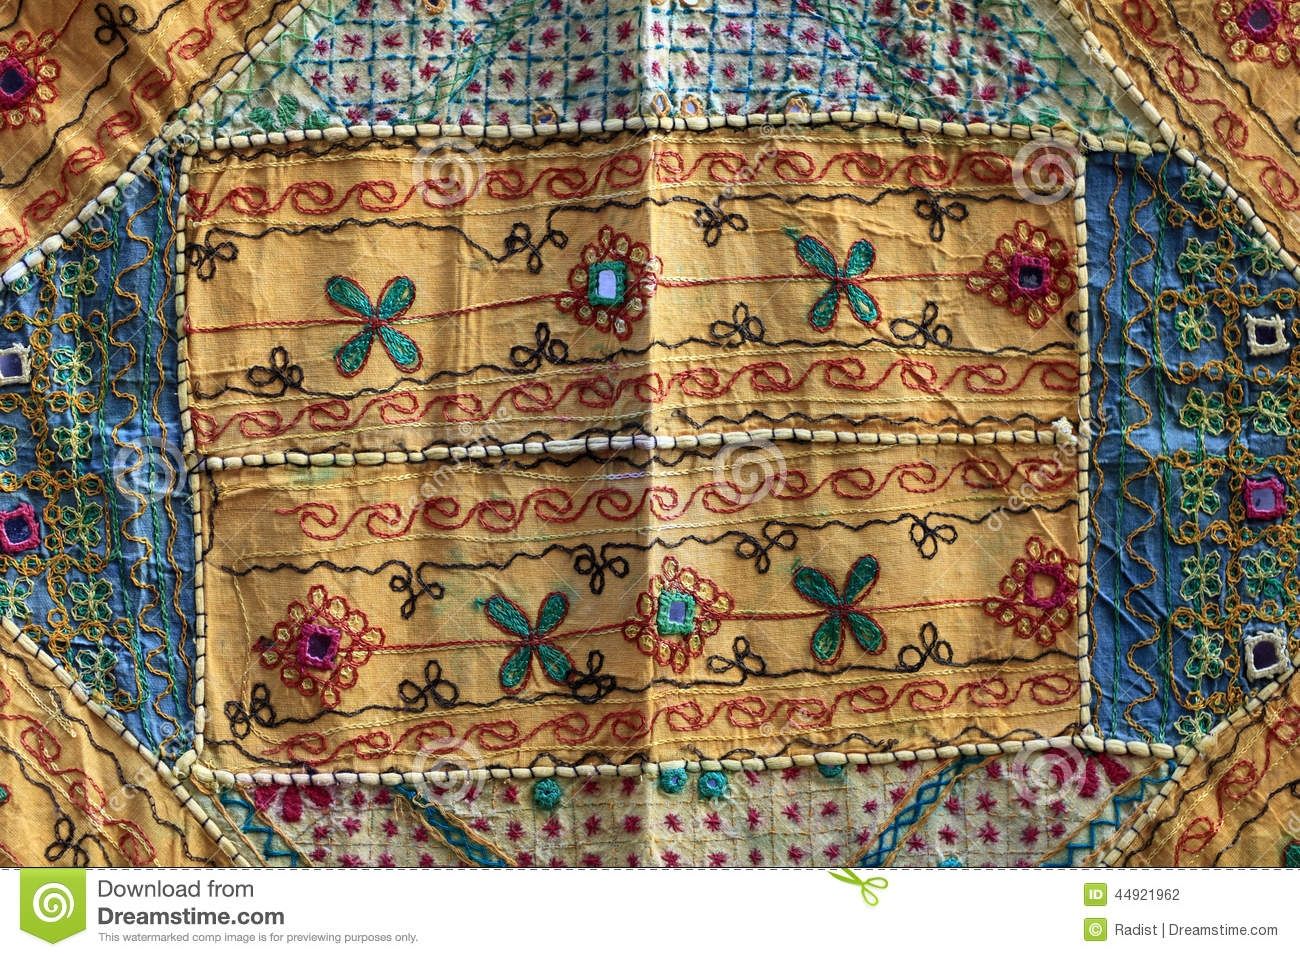 Arabic Carpet Shop Exhibition Colorful Carpets Stock Images Within Arabic Carpets (View 12 of 15)